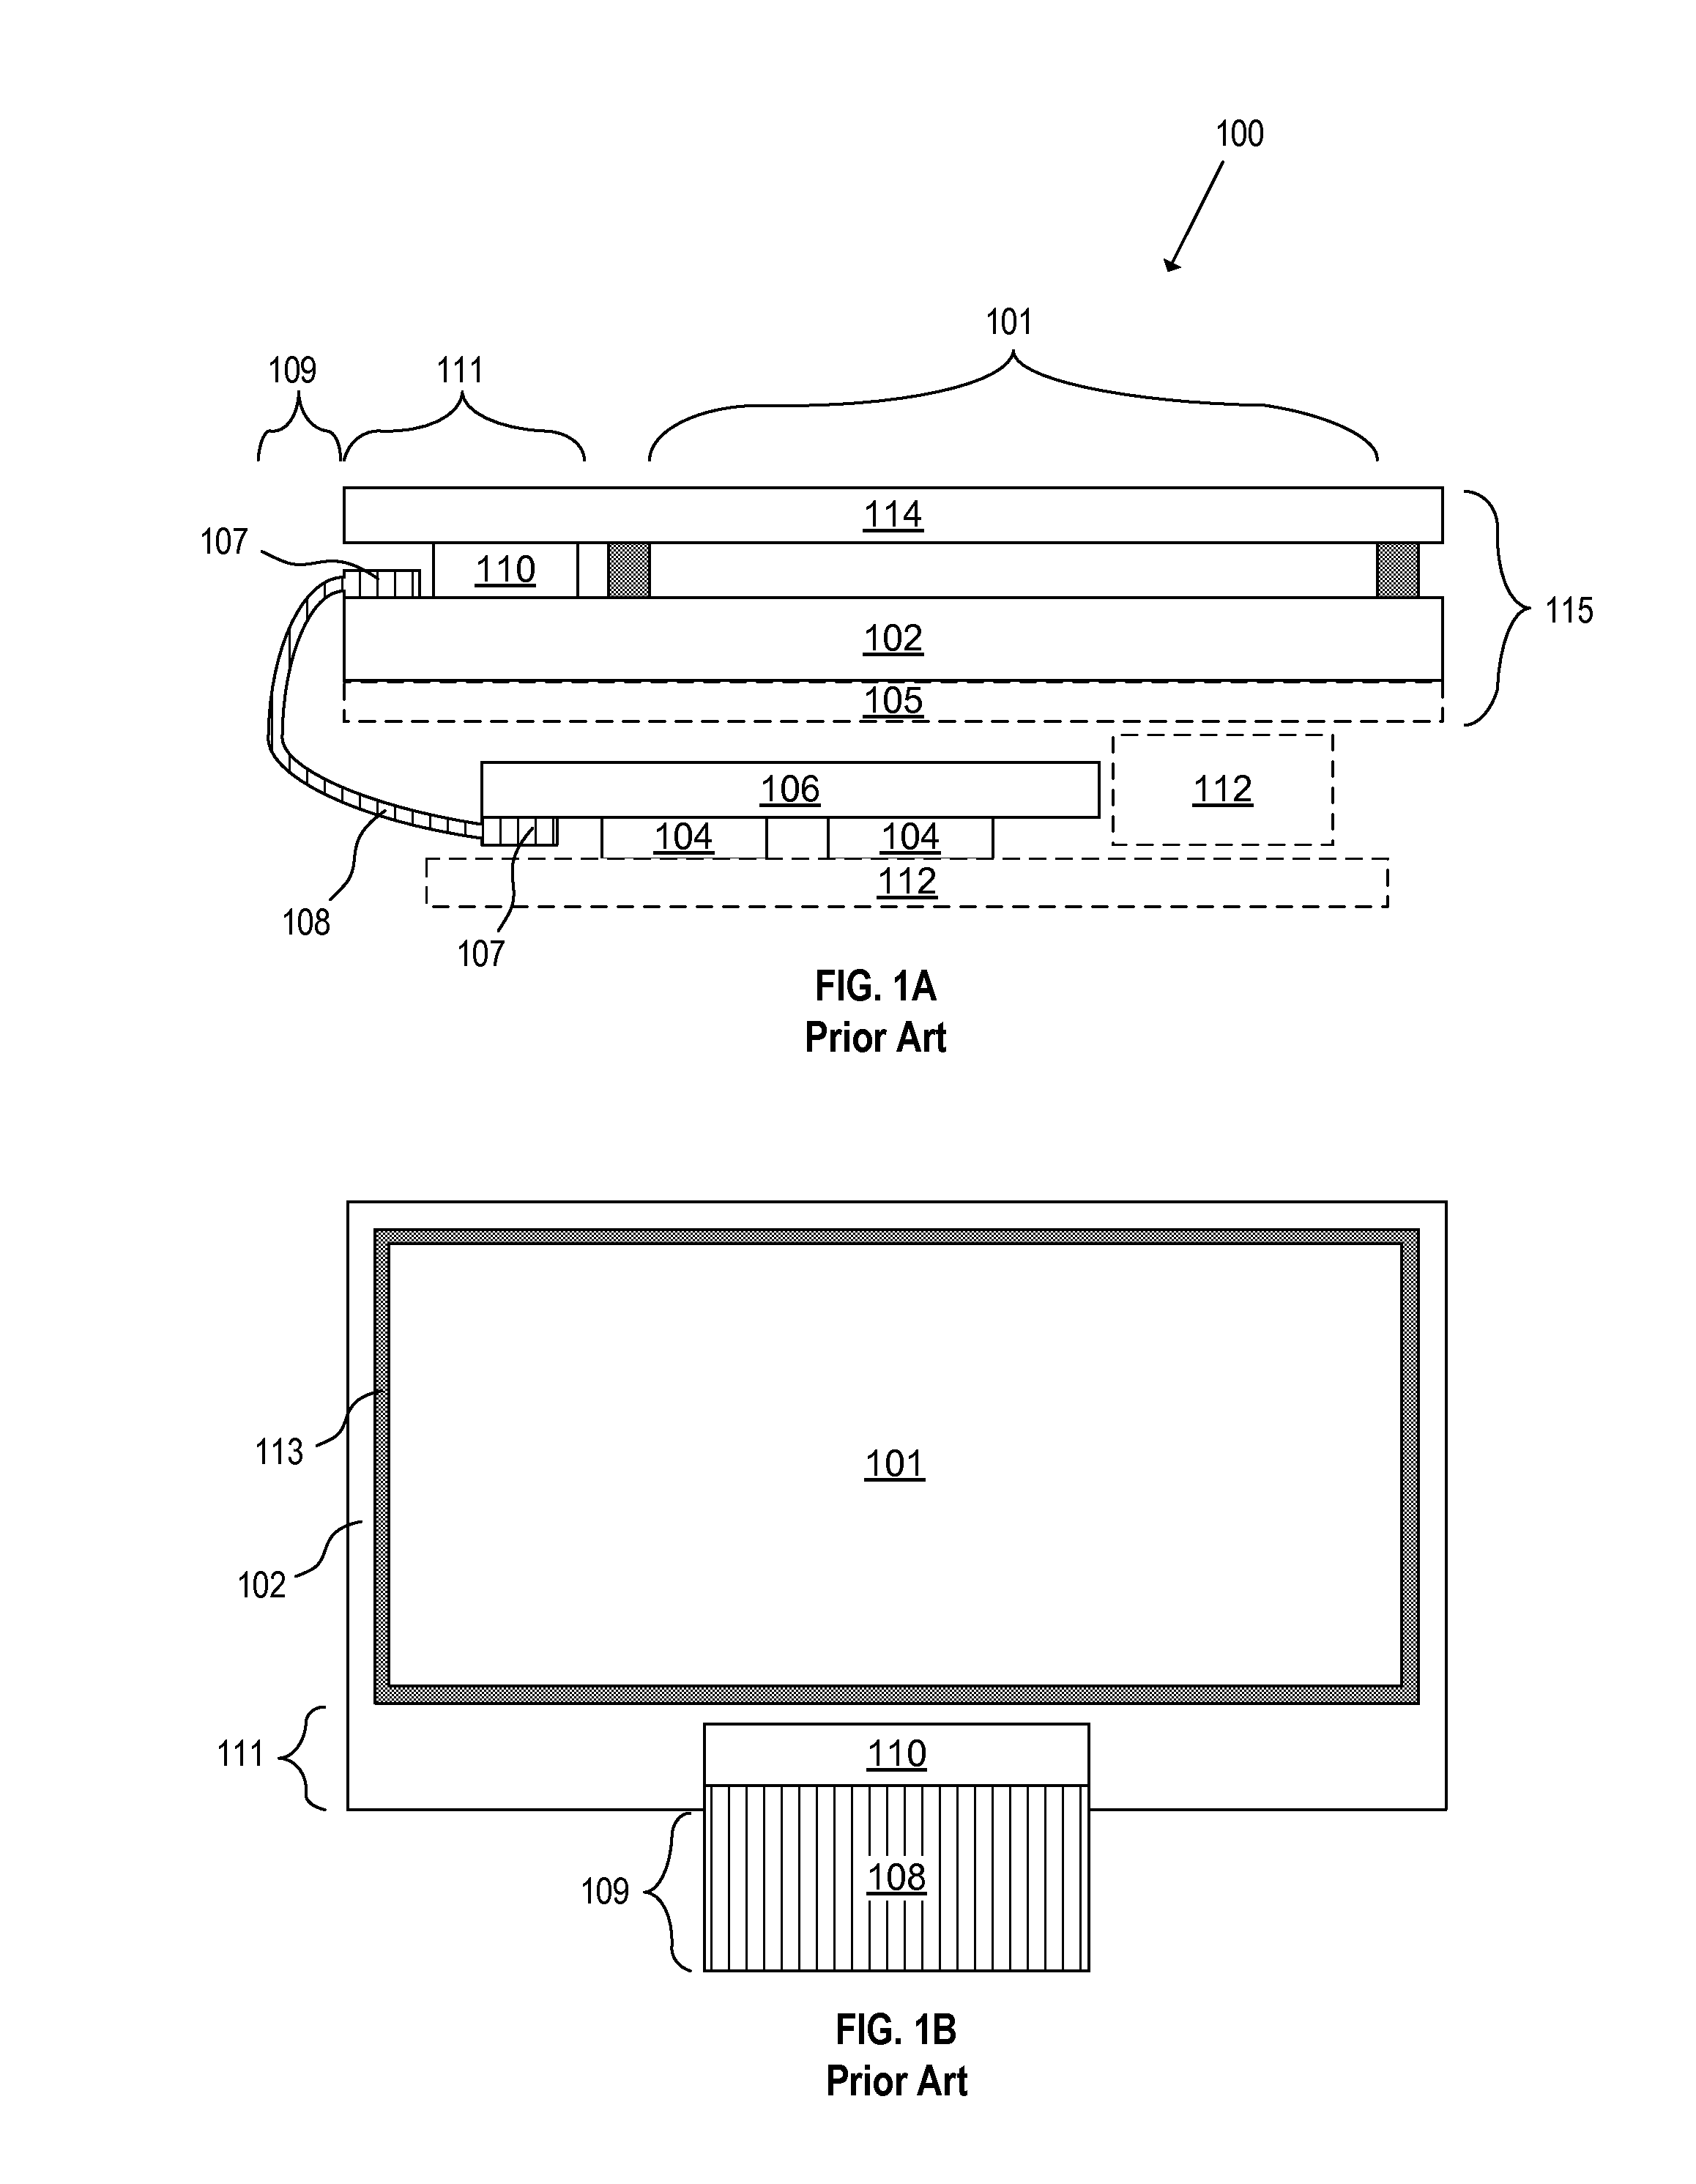 Display module and system applications